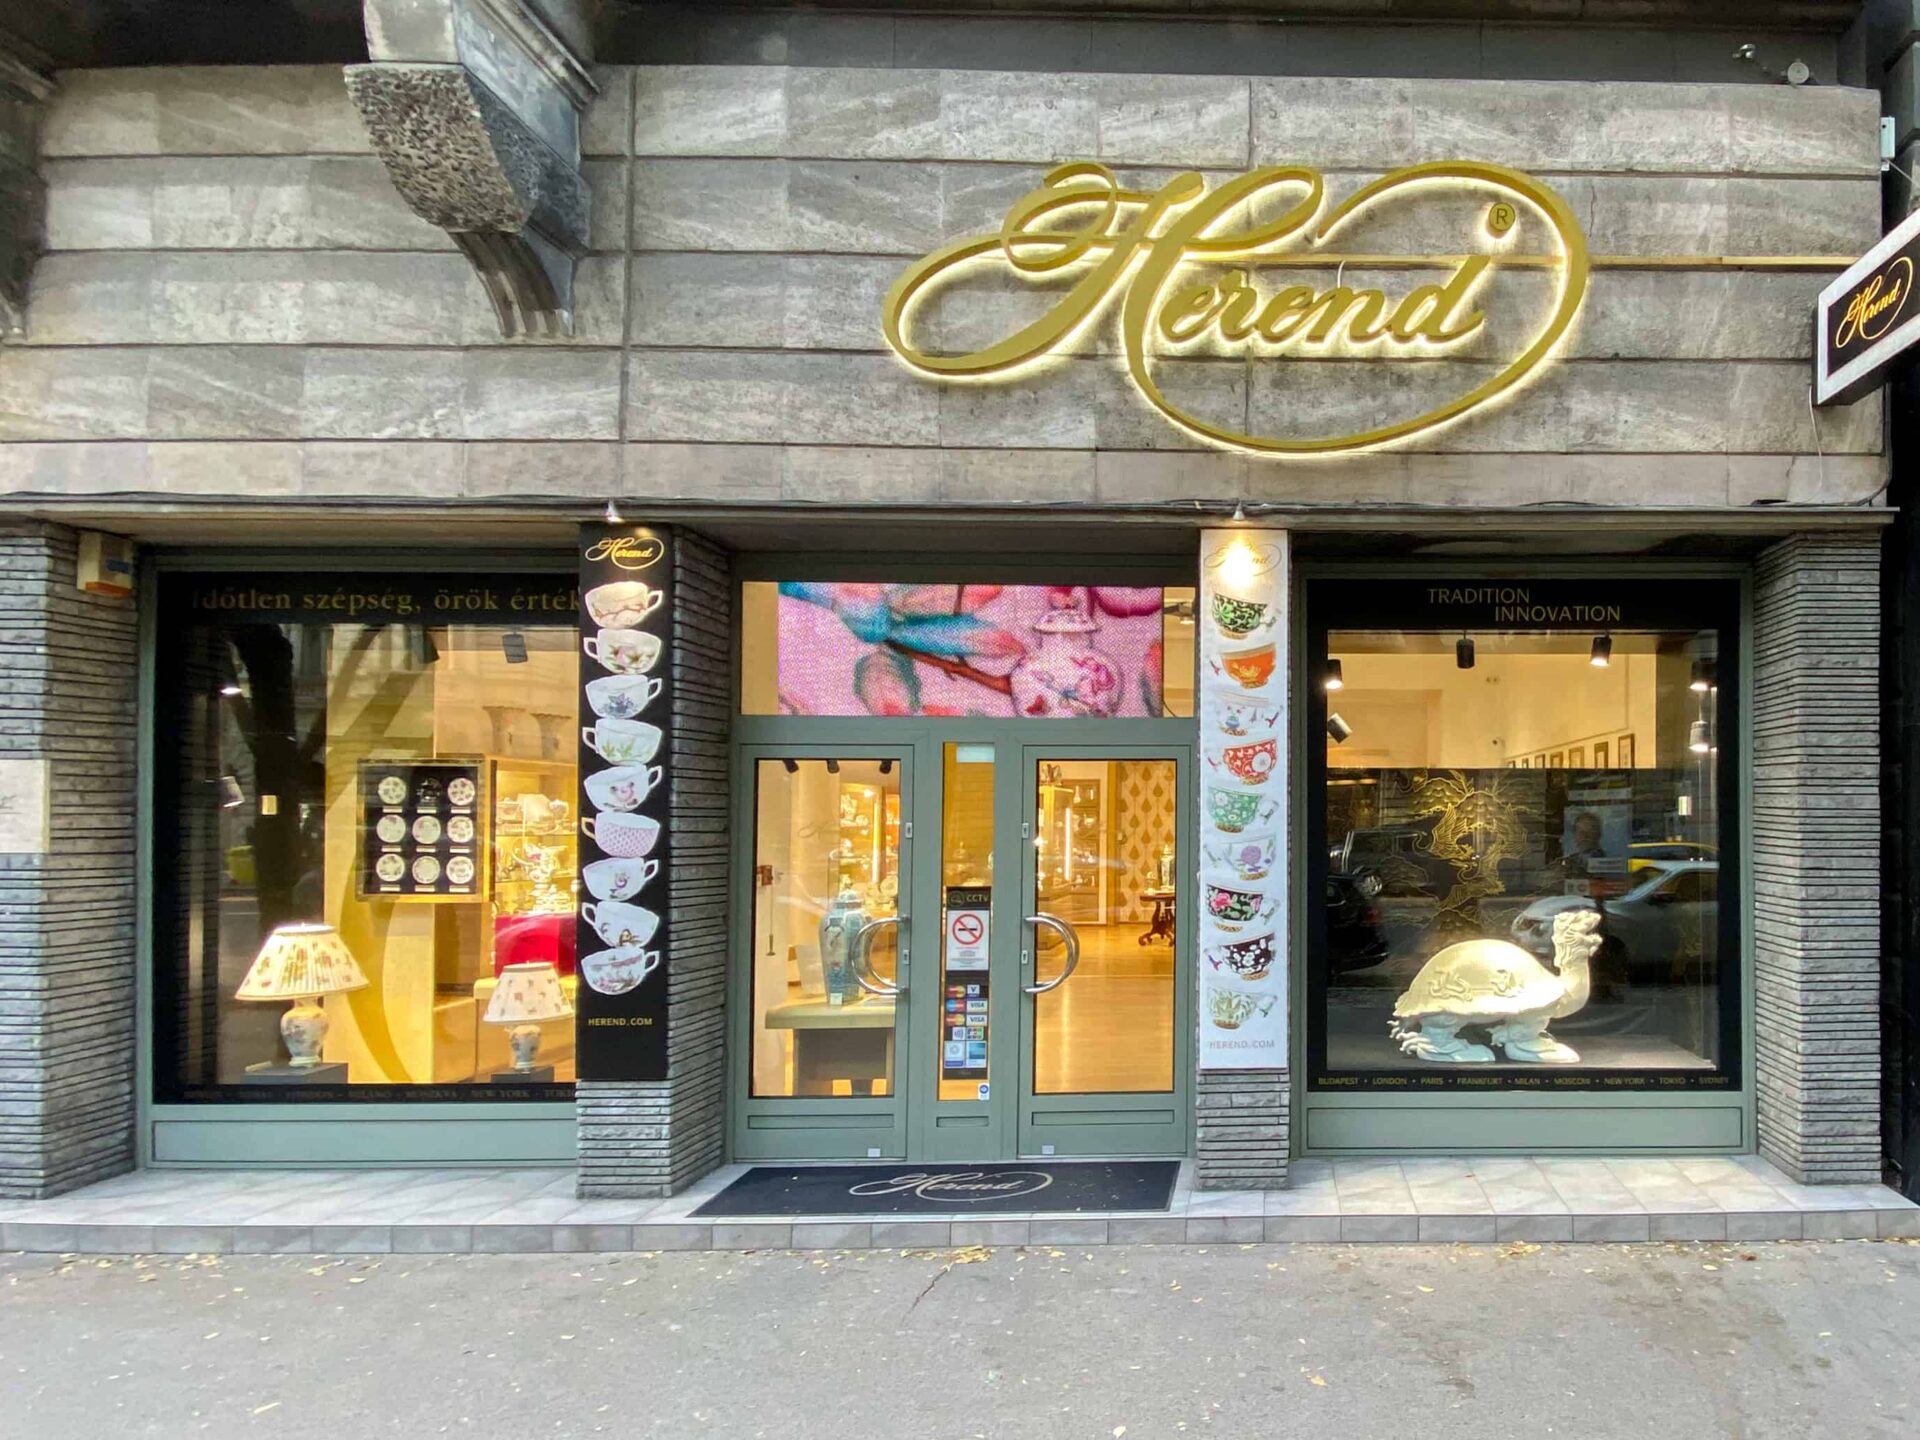 The street front of a Herend Shop